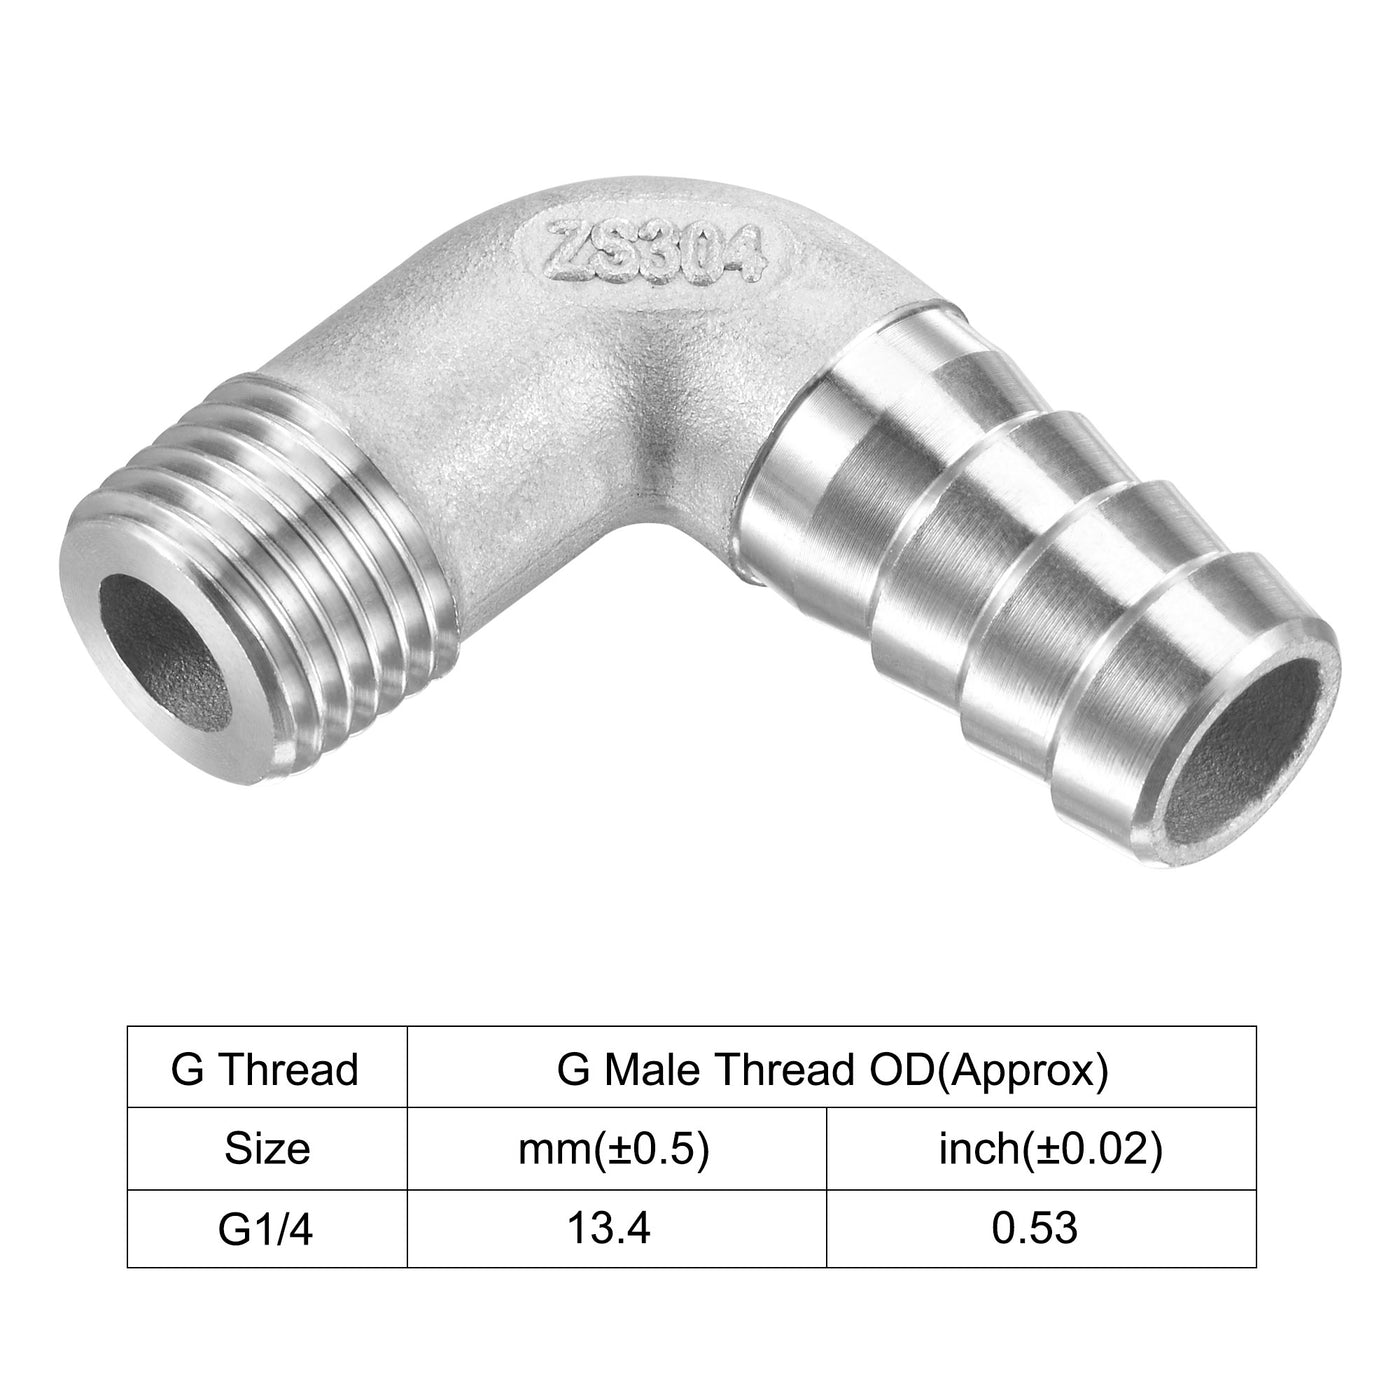 Uxcell Uxcell Stainless Steel Hose Barb Fitting Elbow 10mm x G1/4 Male Pipe Connector 2pcs